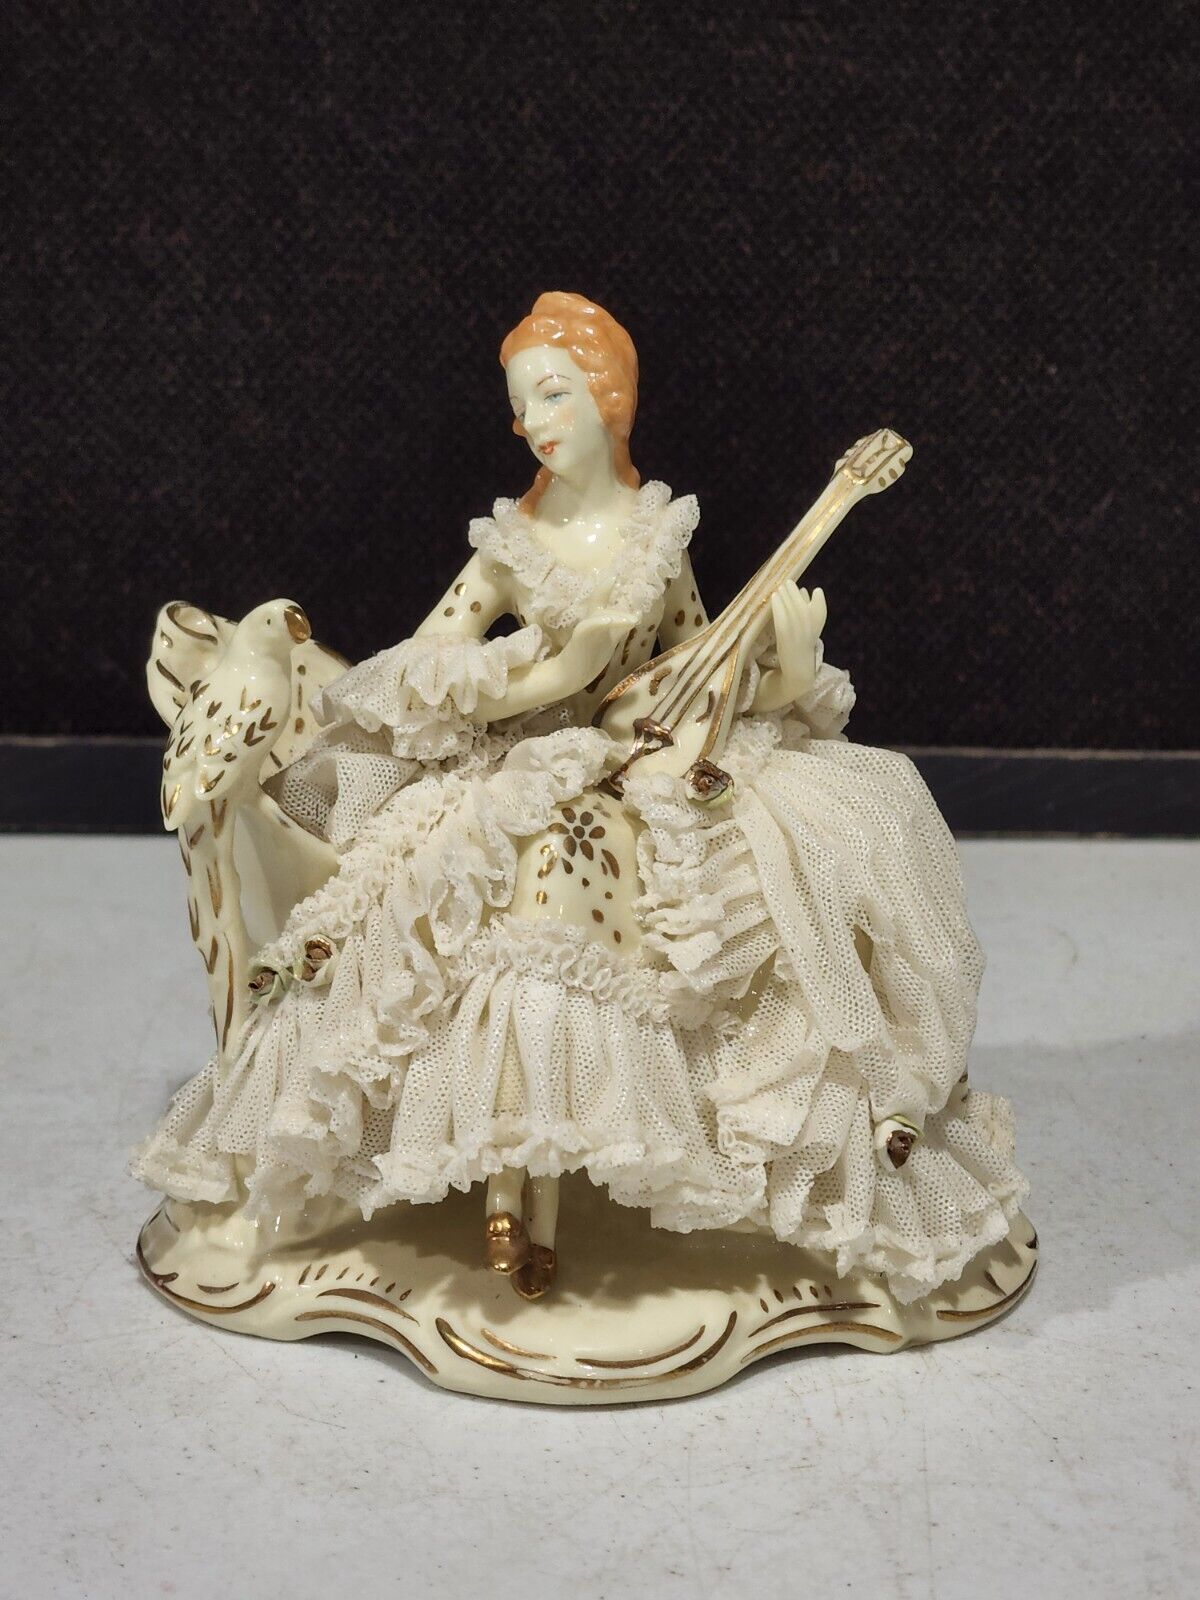 Old Dresden Art Porcelain Lace Figurine Woman on Couch Playing Mandolin w/Parrot